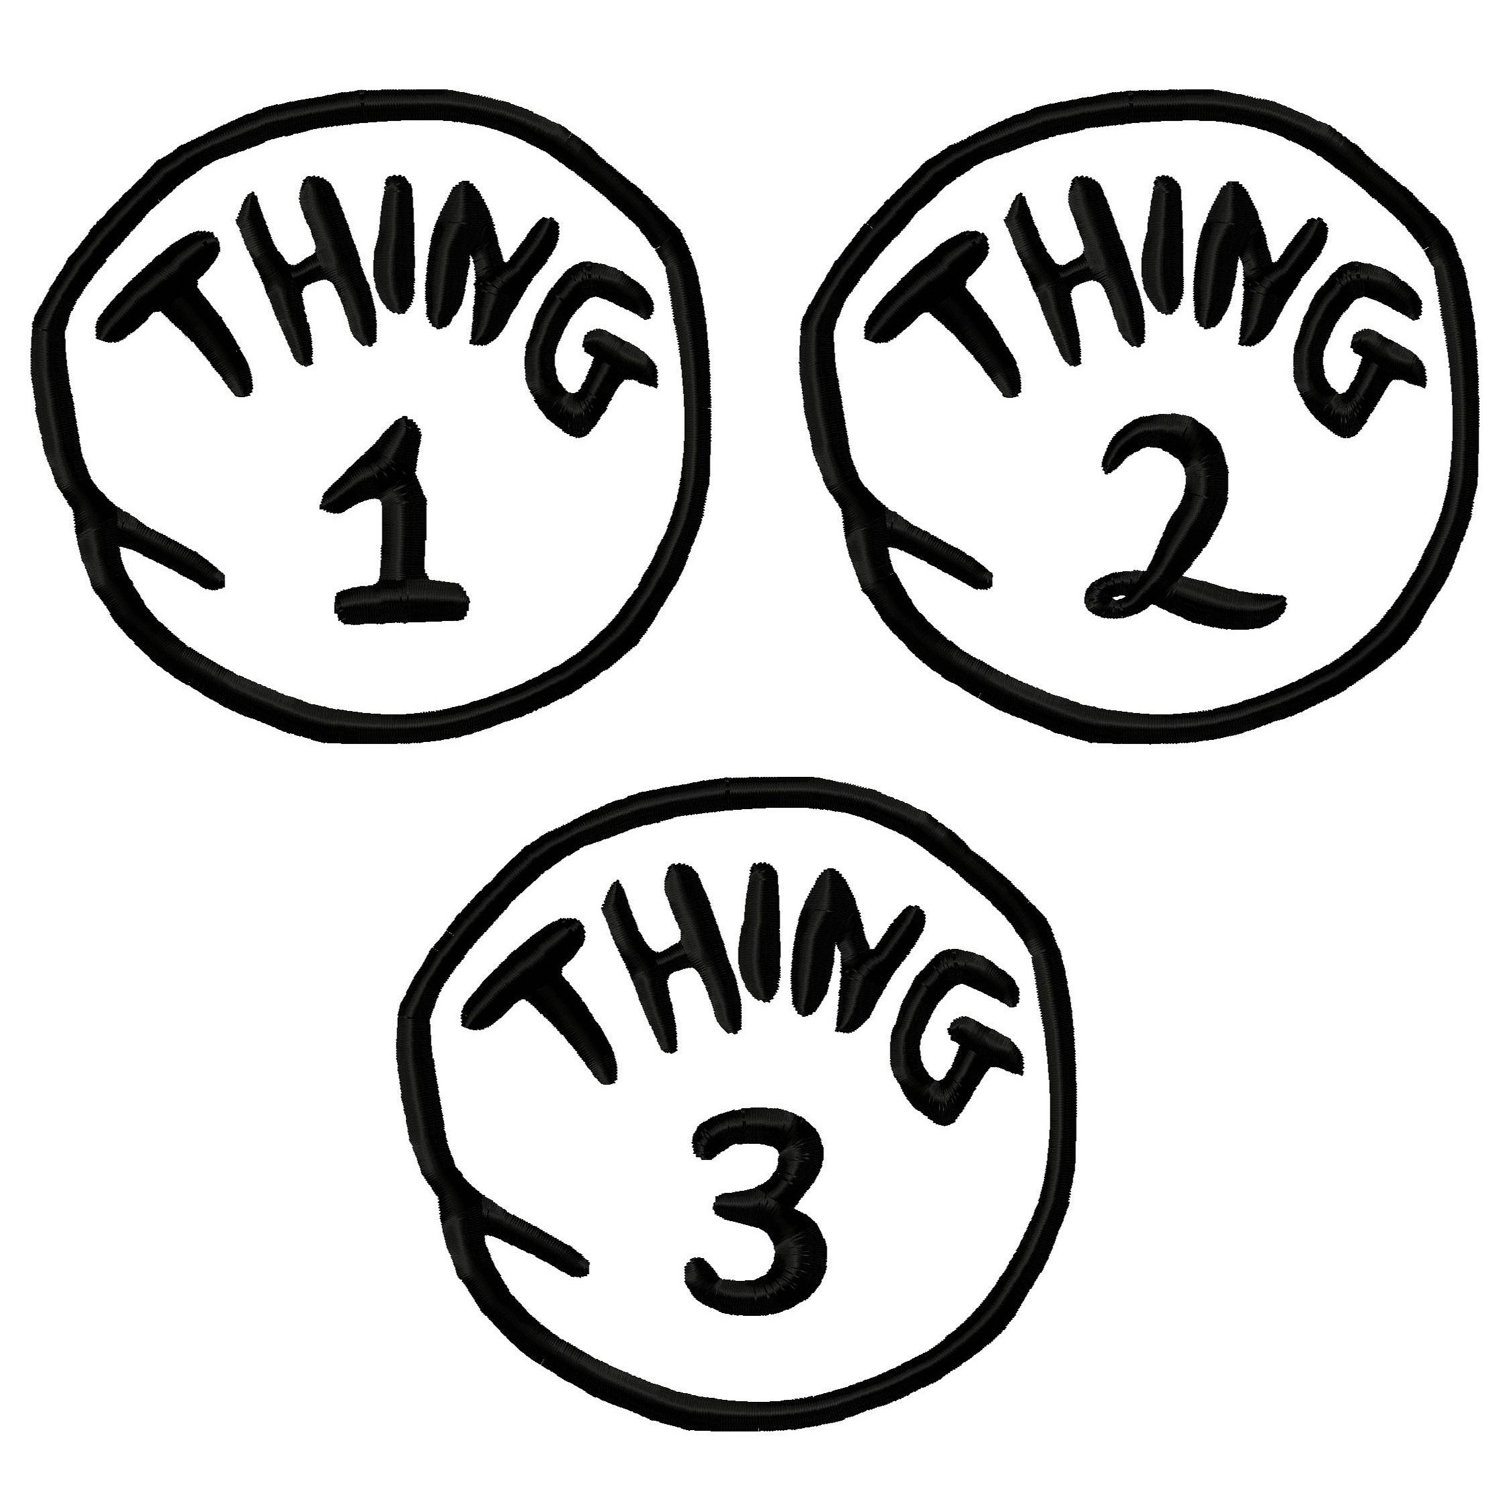 Printable Thing 1 And Thing 2